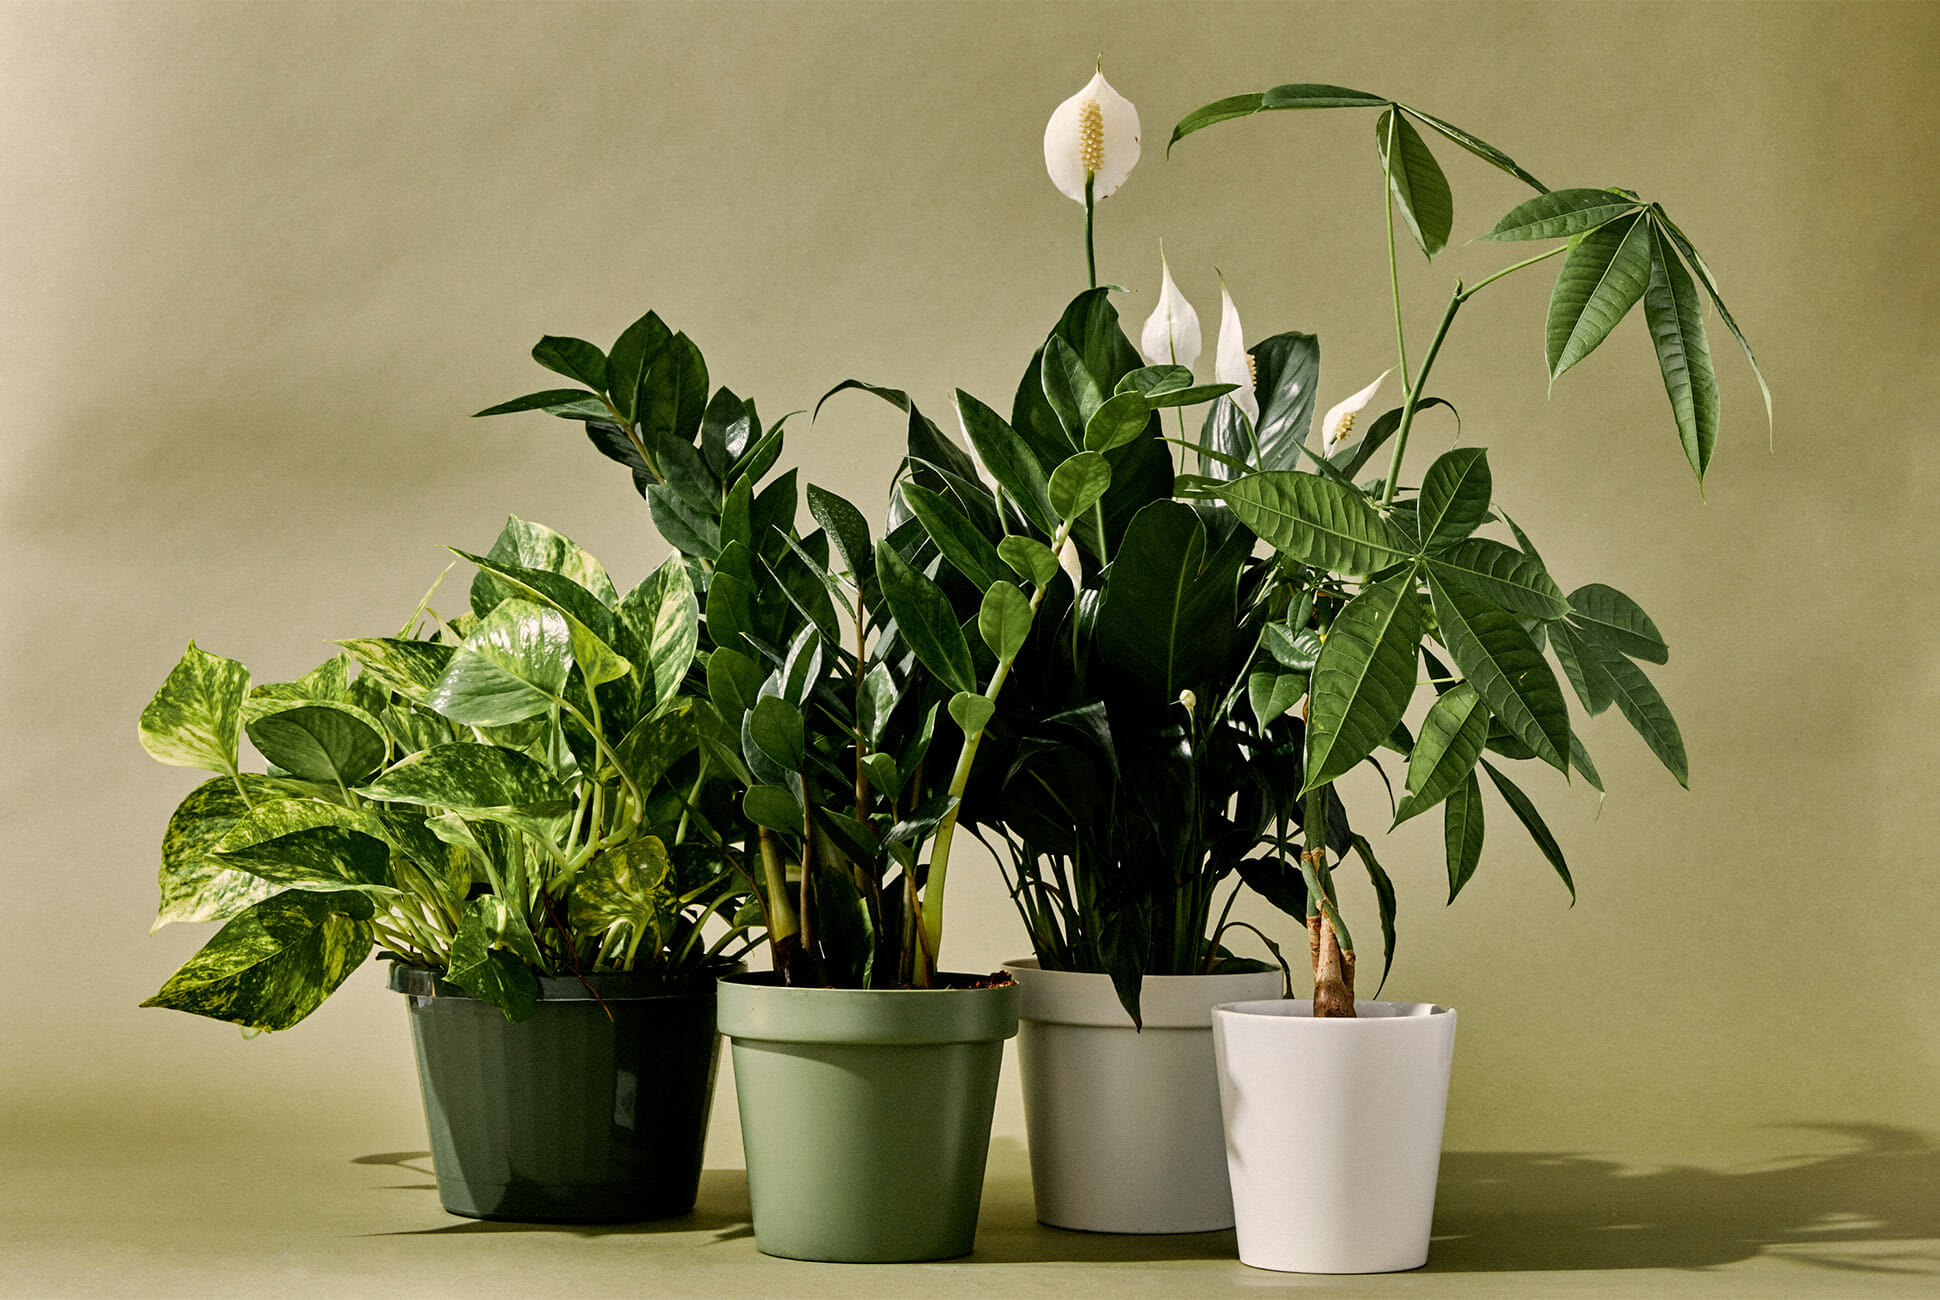 How To Keep Your Houseplants Healthy & Thriving?